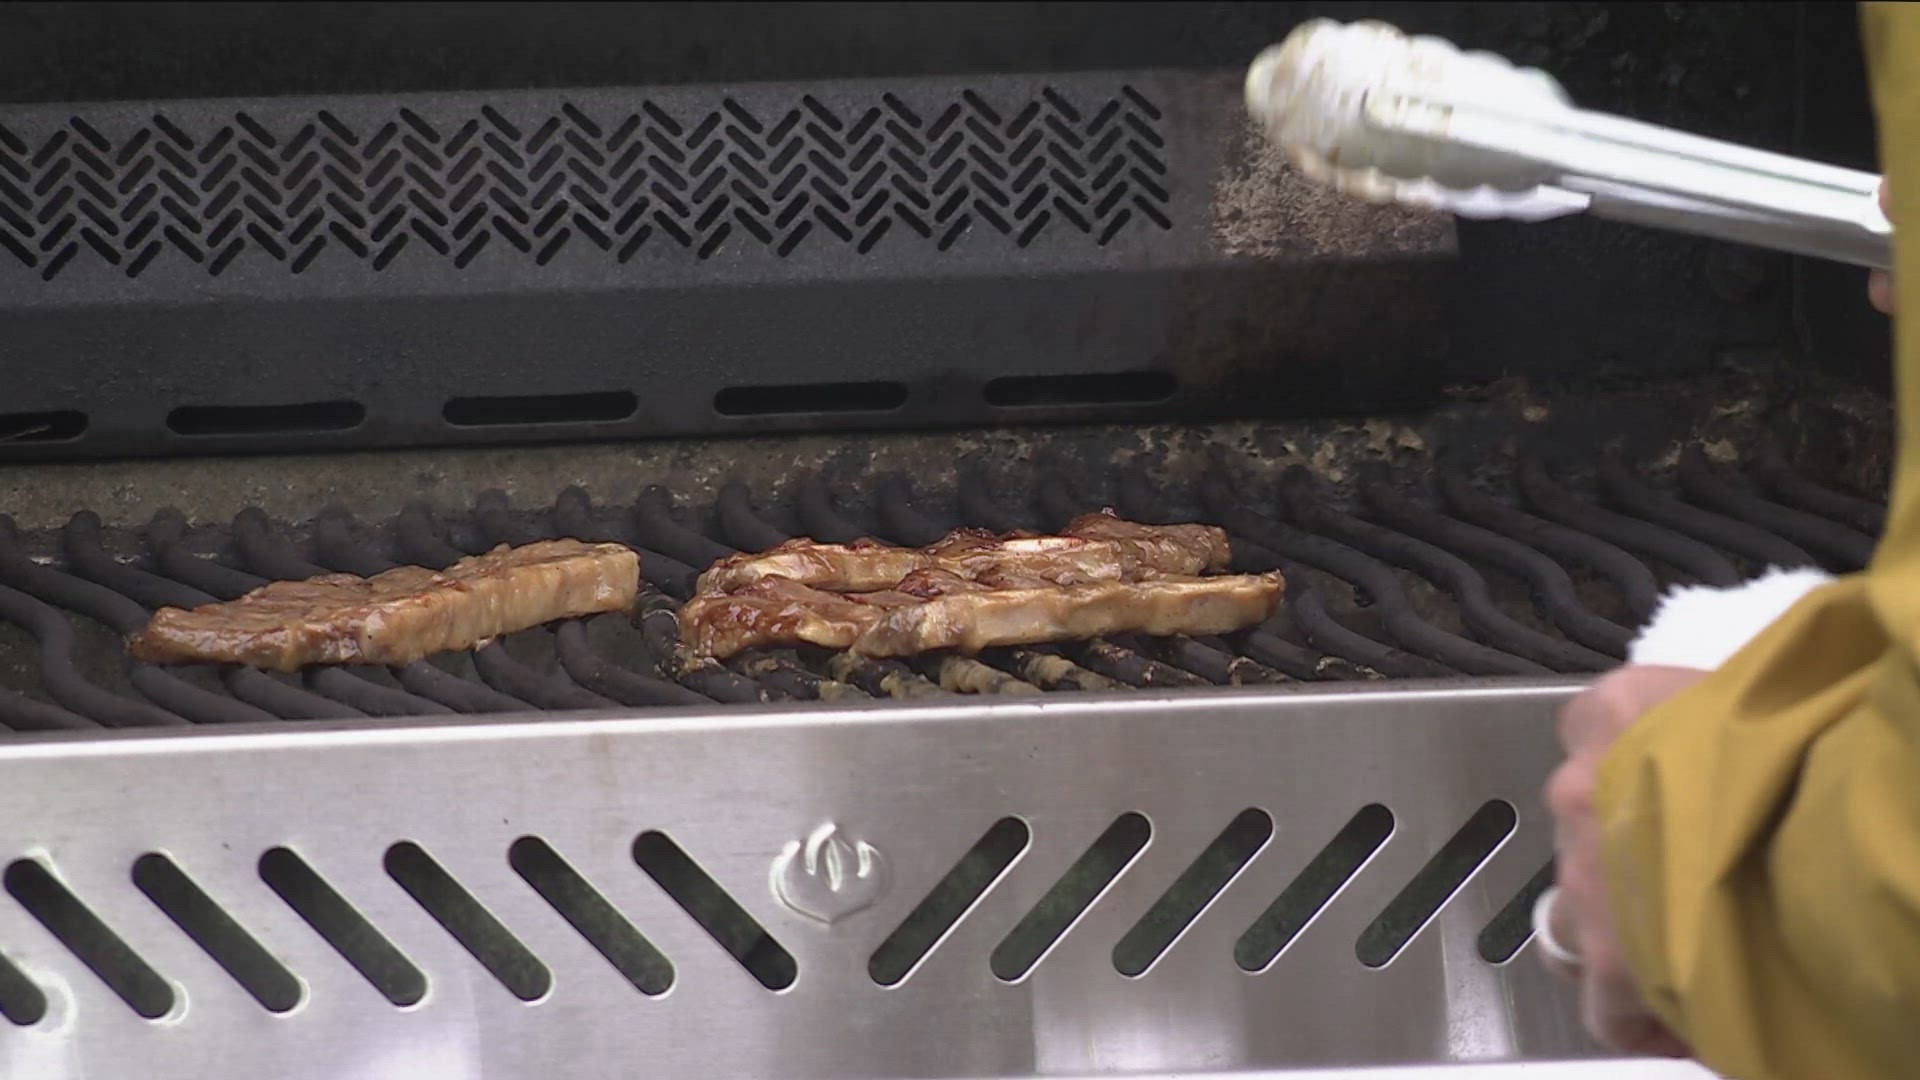 Ann Kim joined KARE 11 Saturday to grill some ribs and talk more about her new venture.